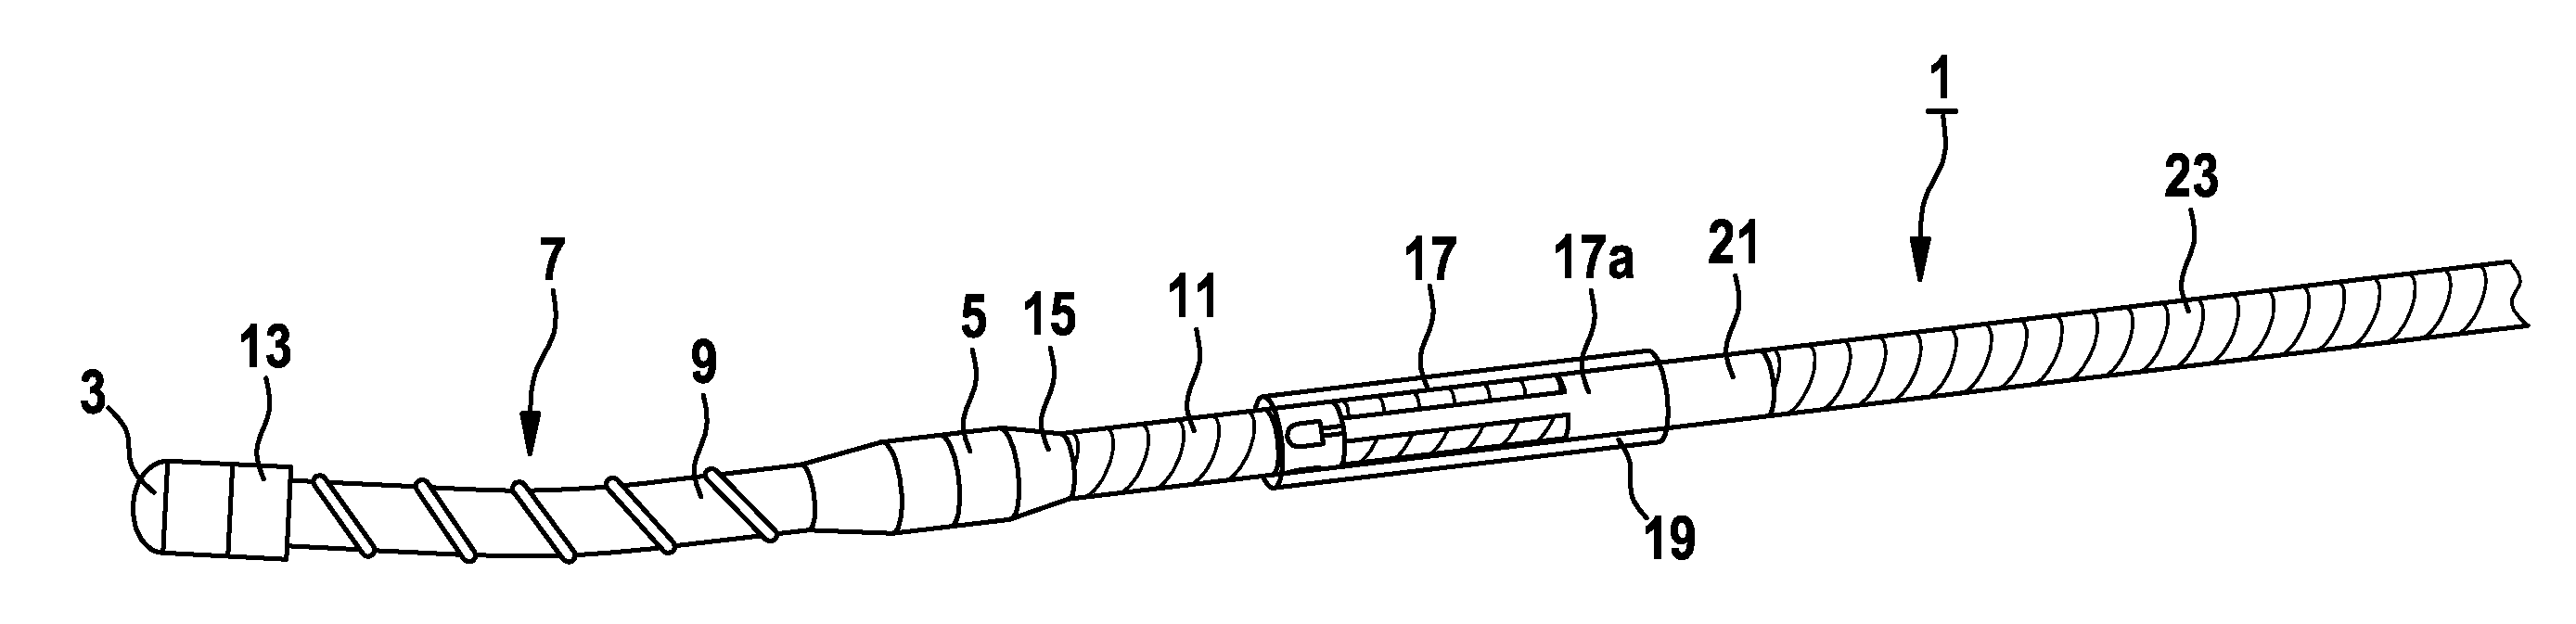 Implantable catheter lead or electrode lead